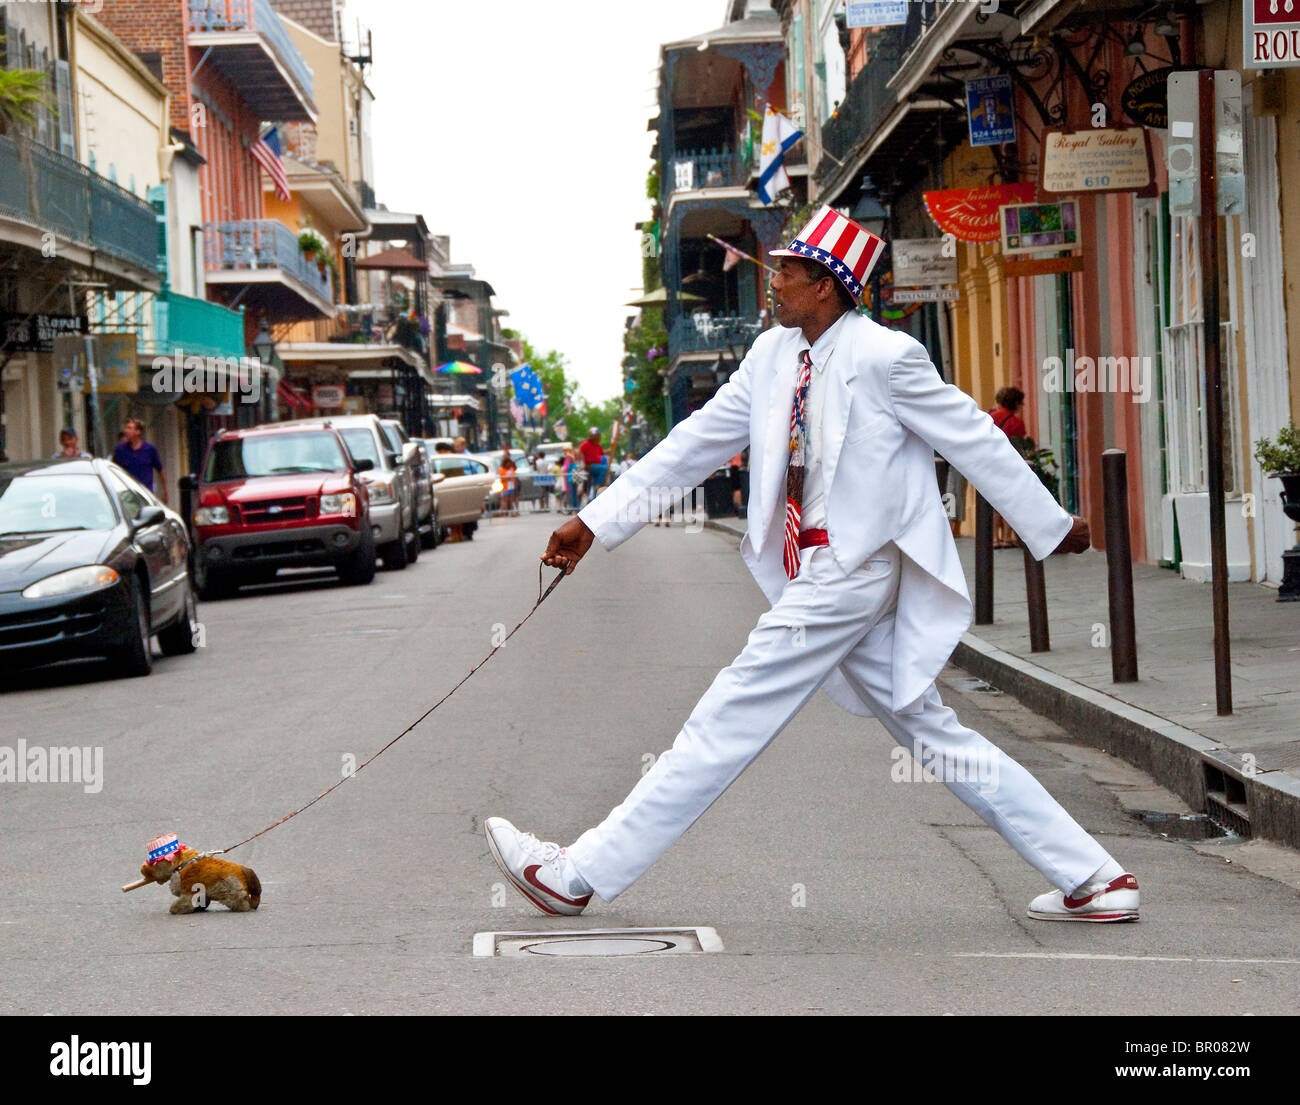 Street performer in French Quarter of New Orleans, Louisiana, USA Stock Photo